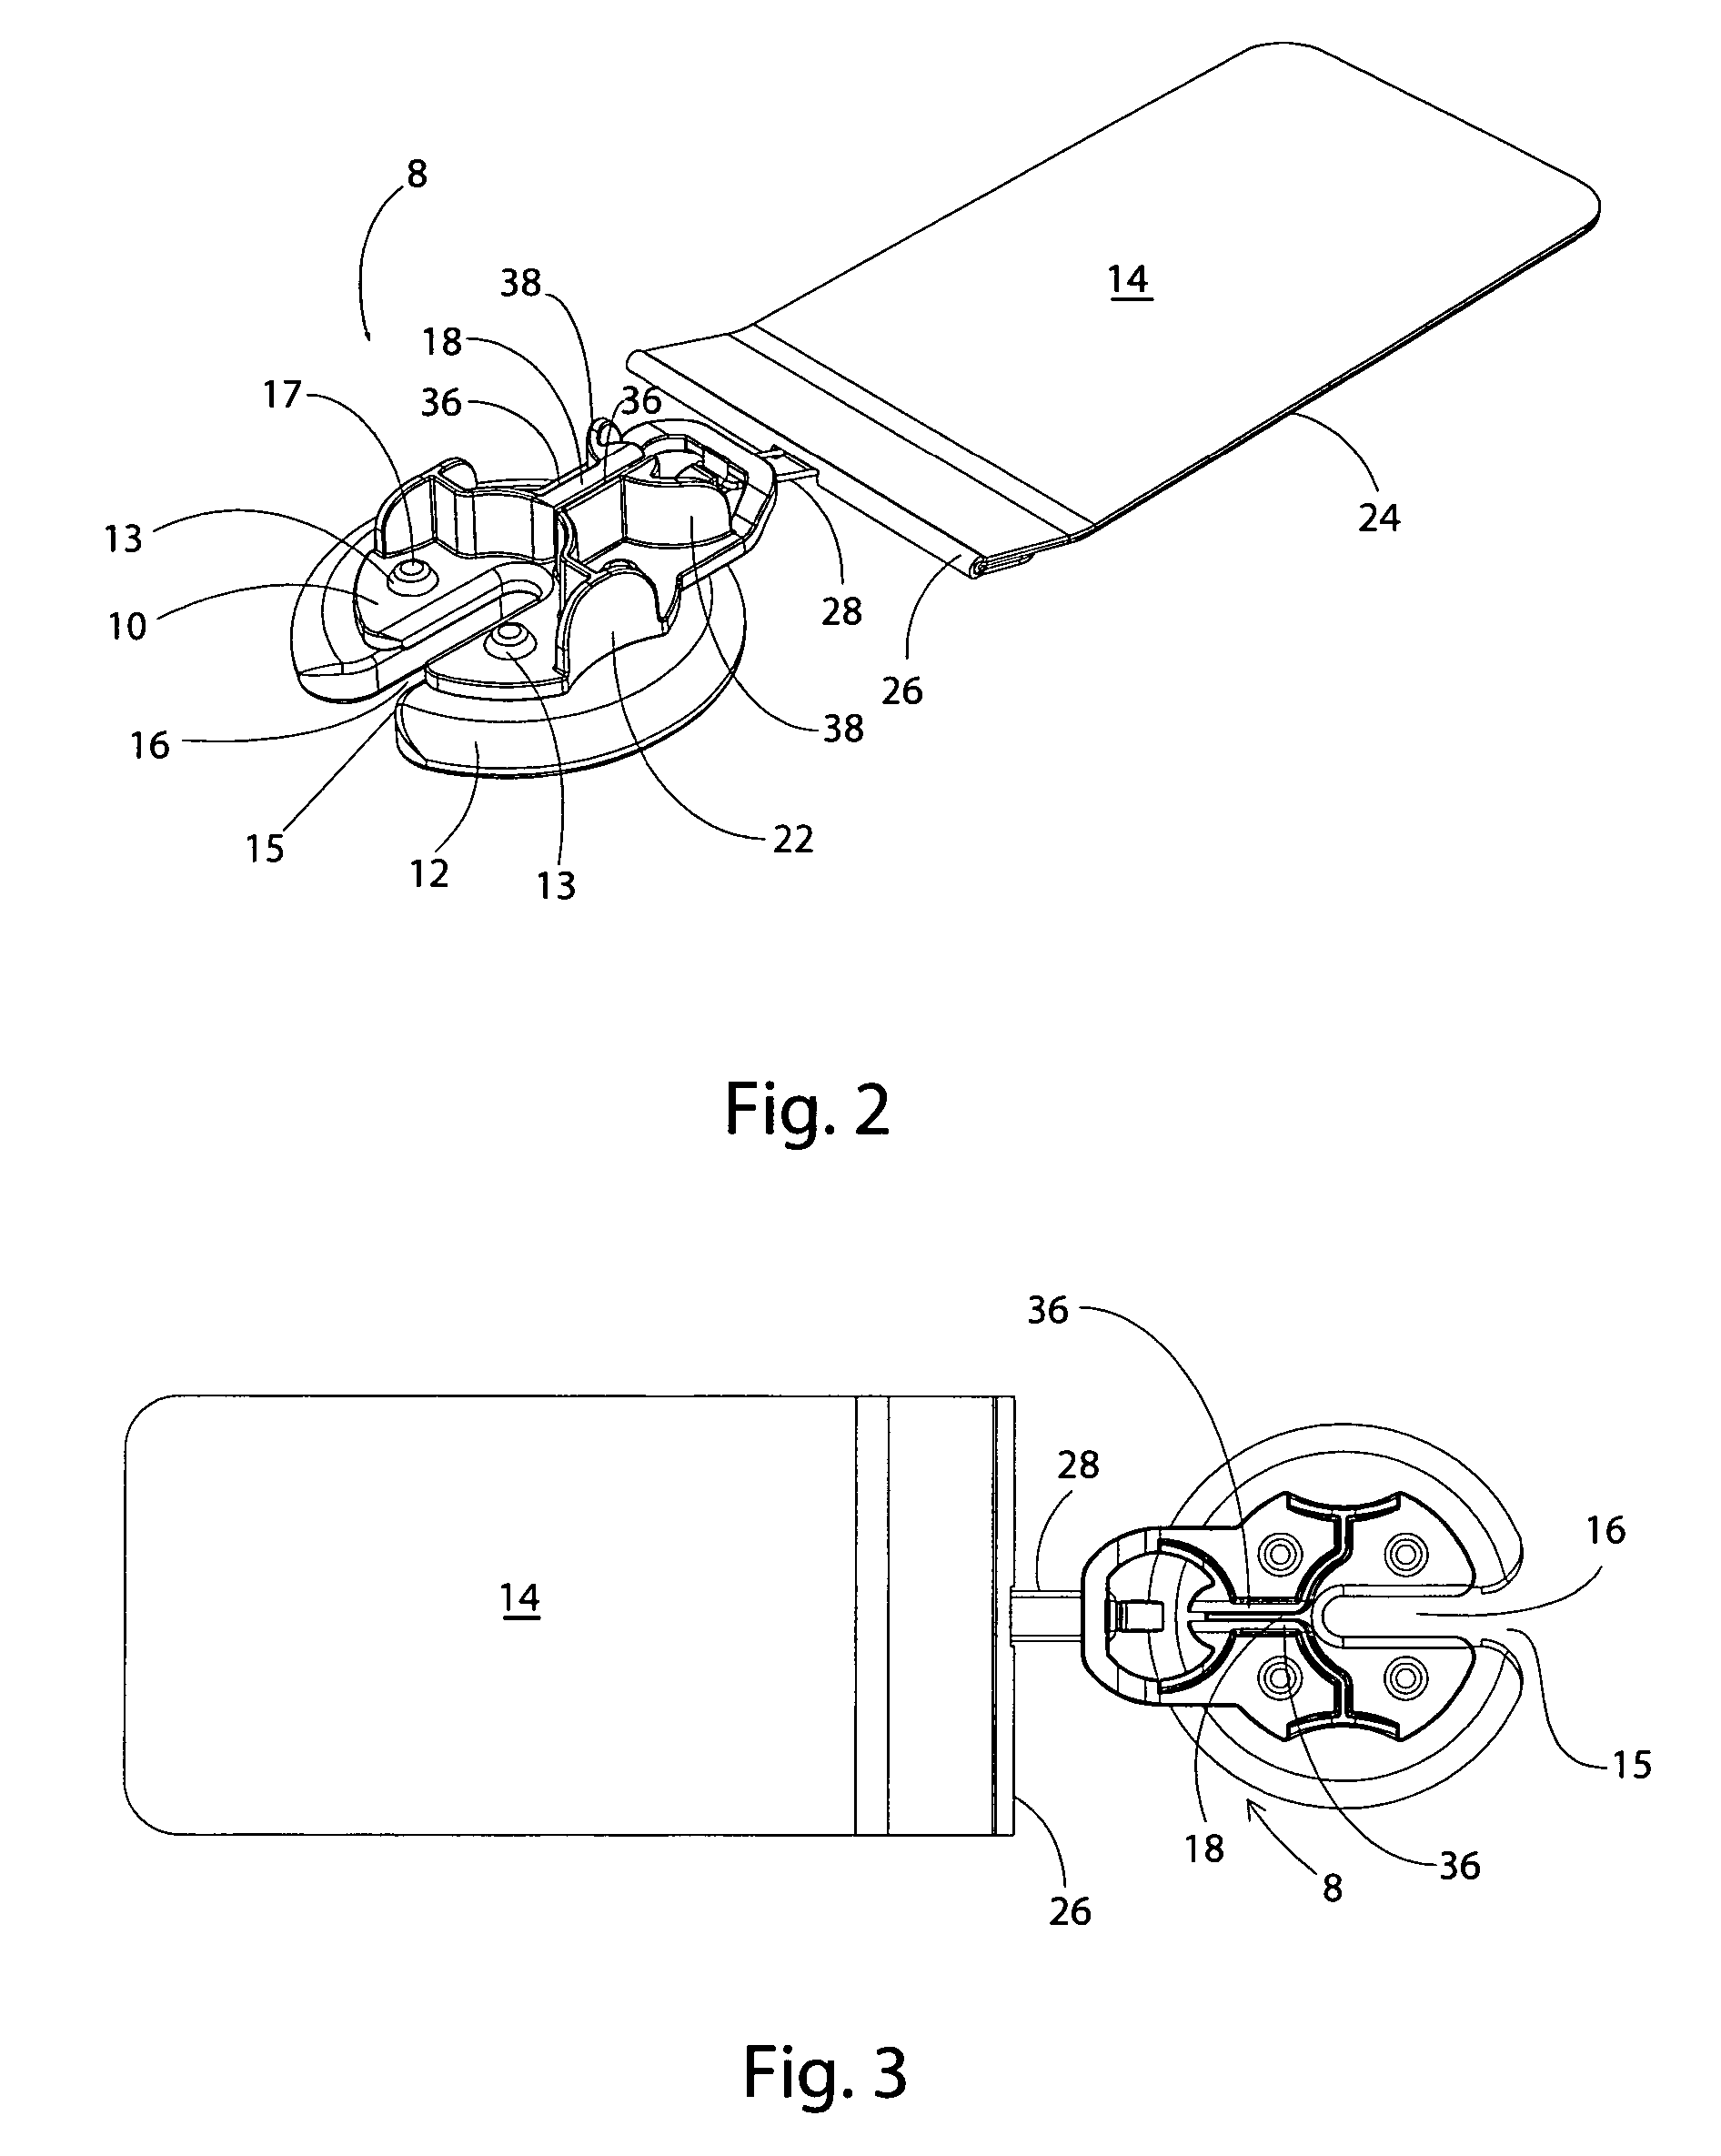 Button anchor system for moving tissue